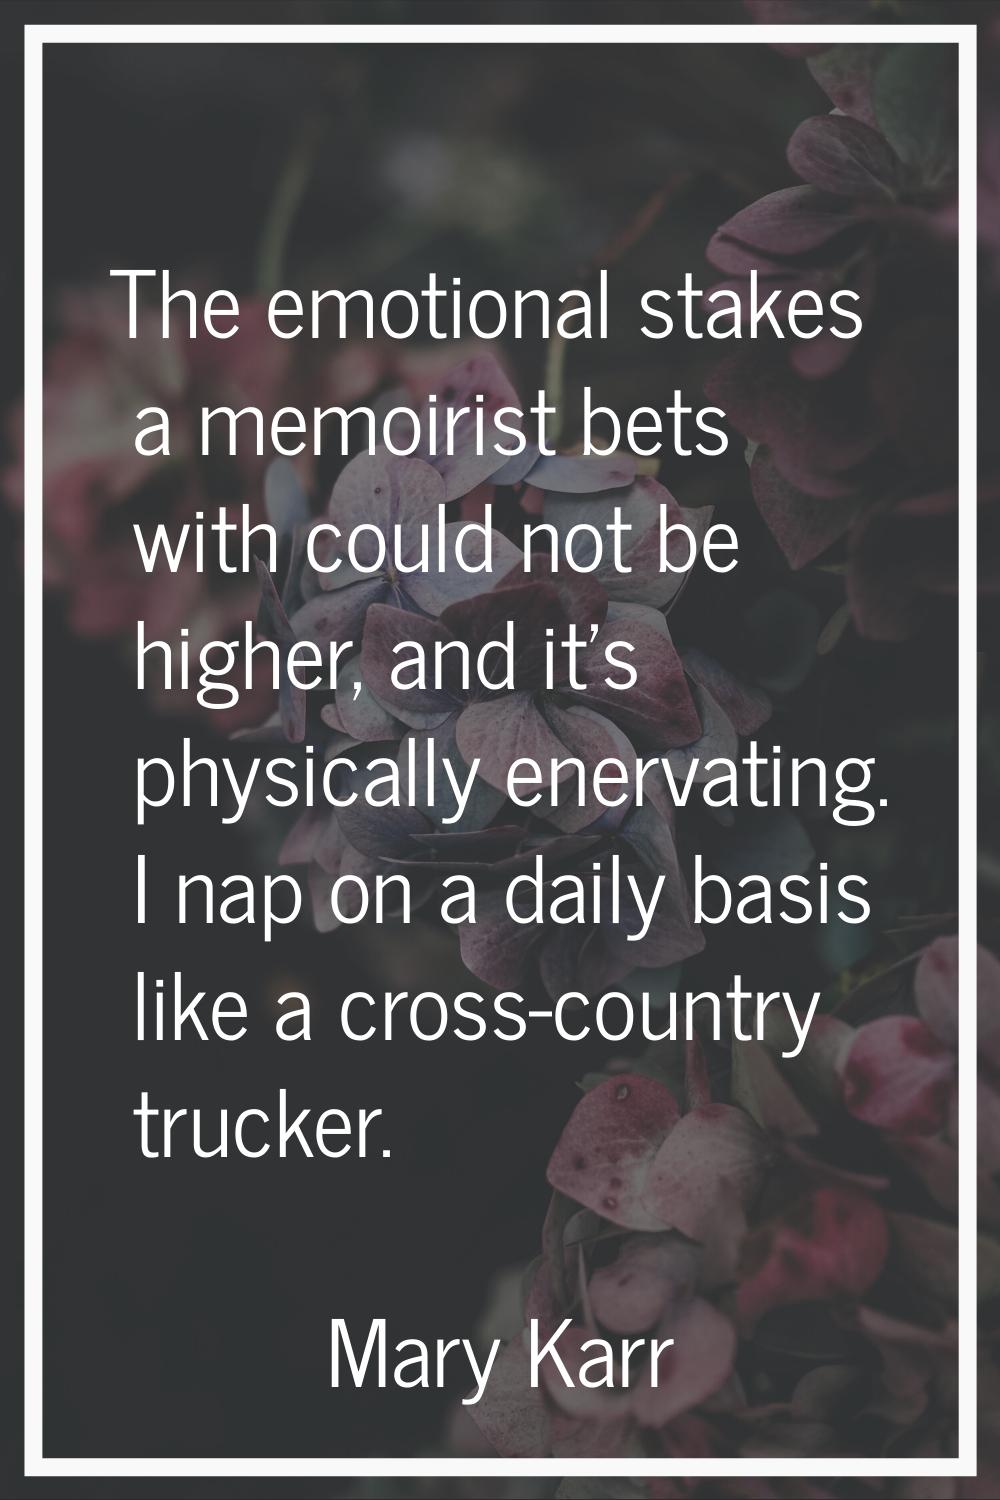 The emotional stakes a memoirist bets with could not be higher, and it's physically enervating. I n